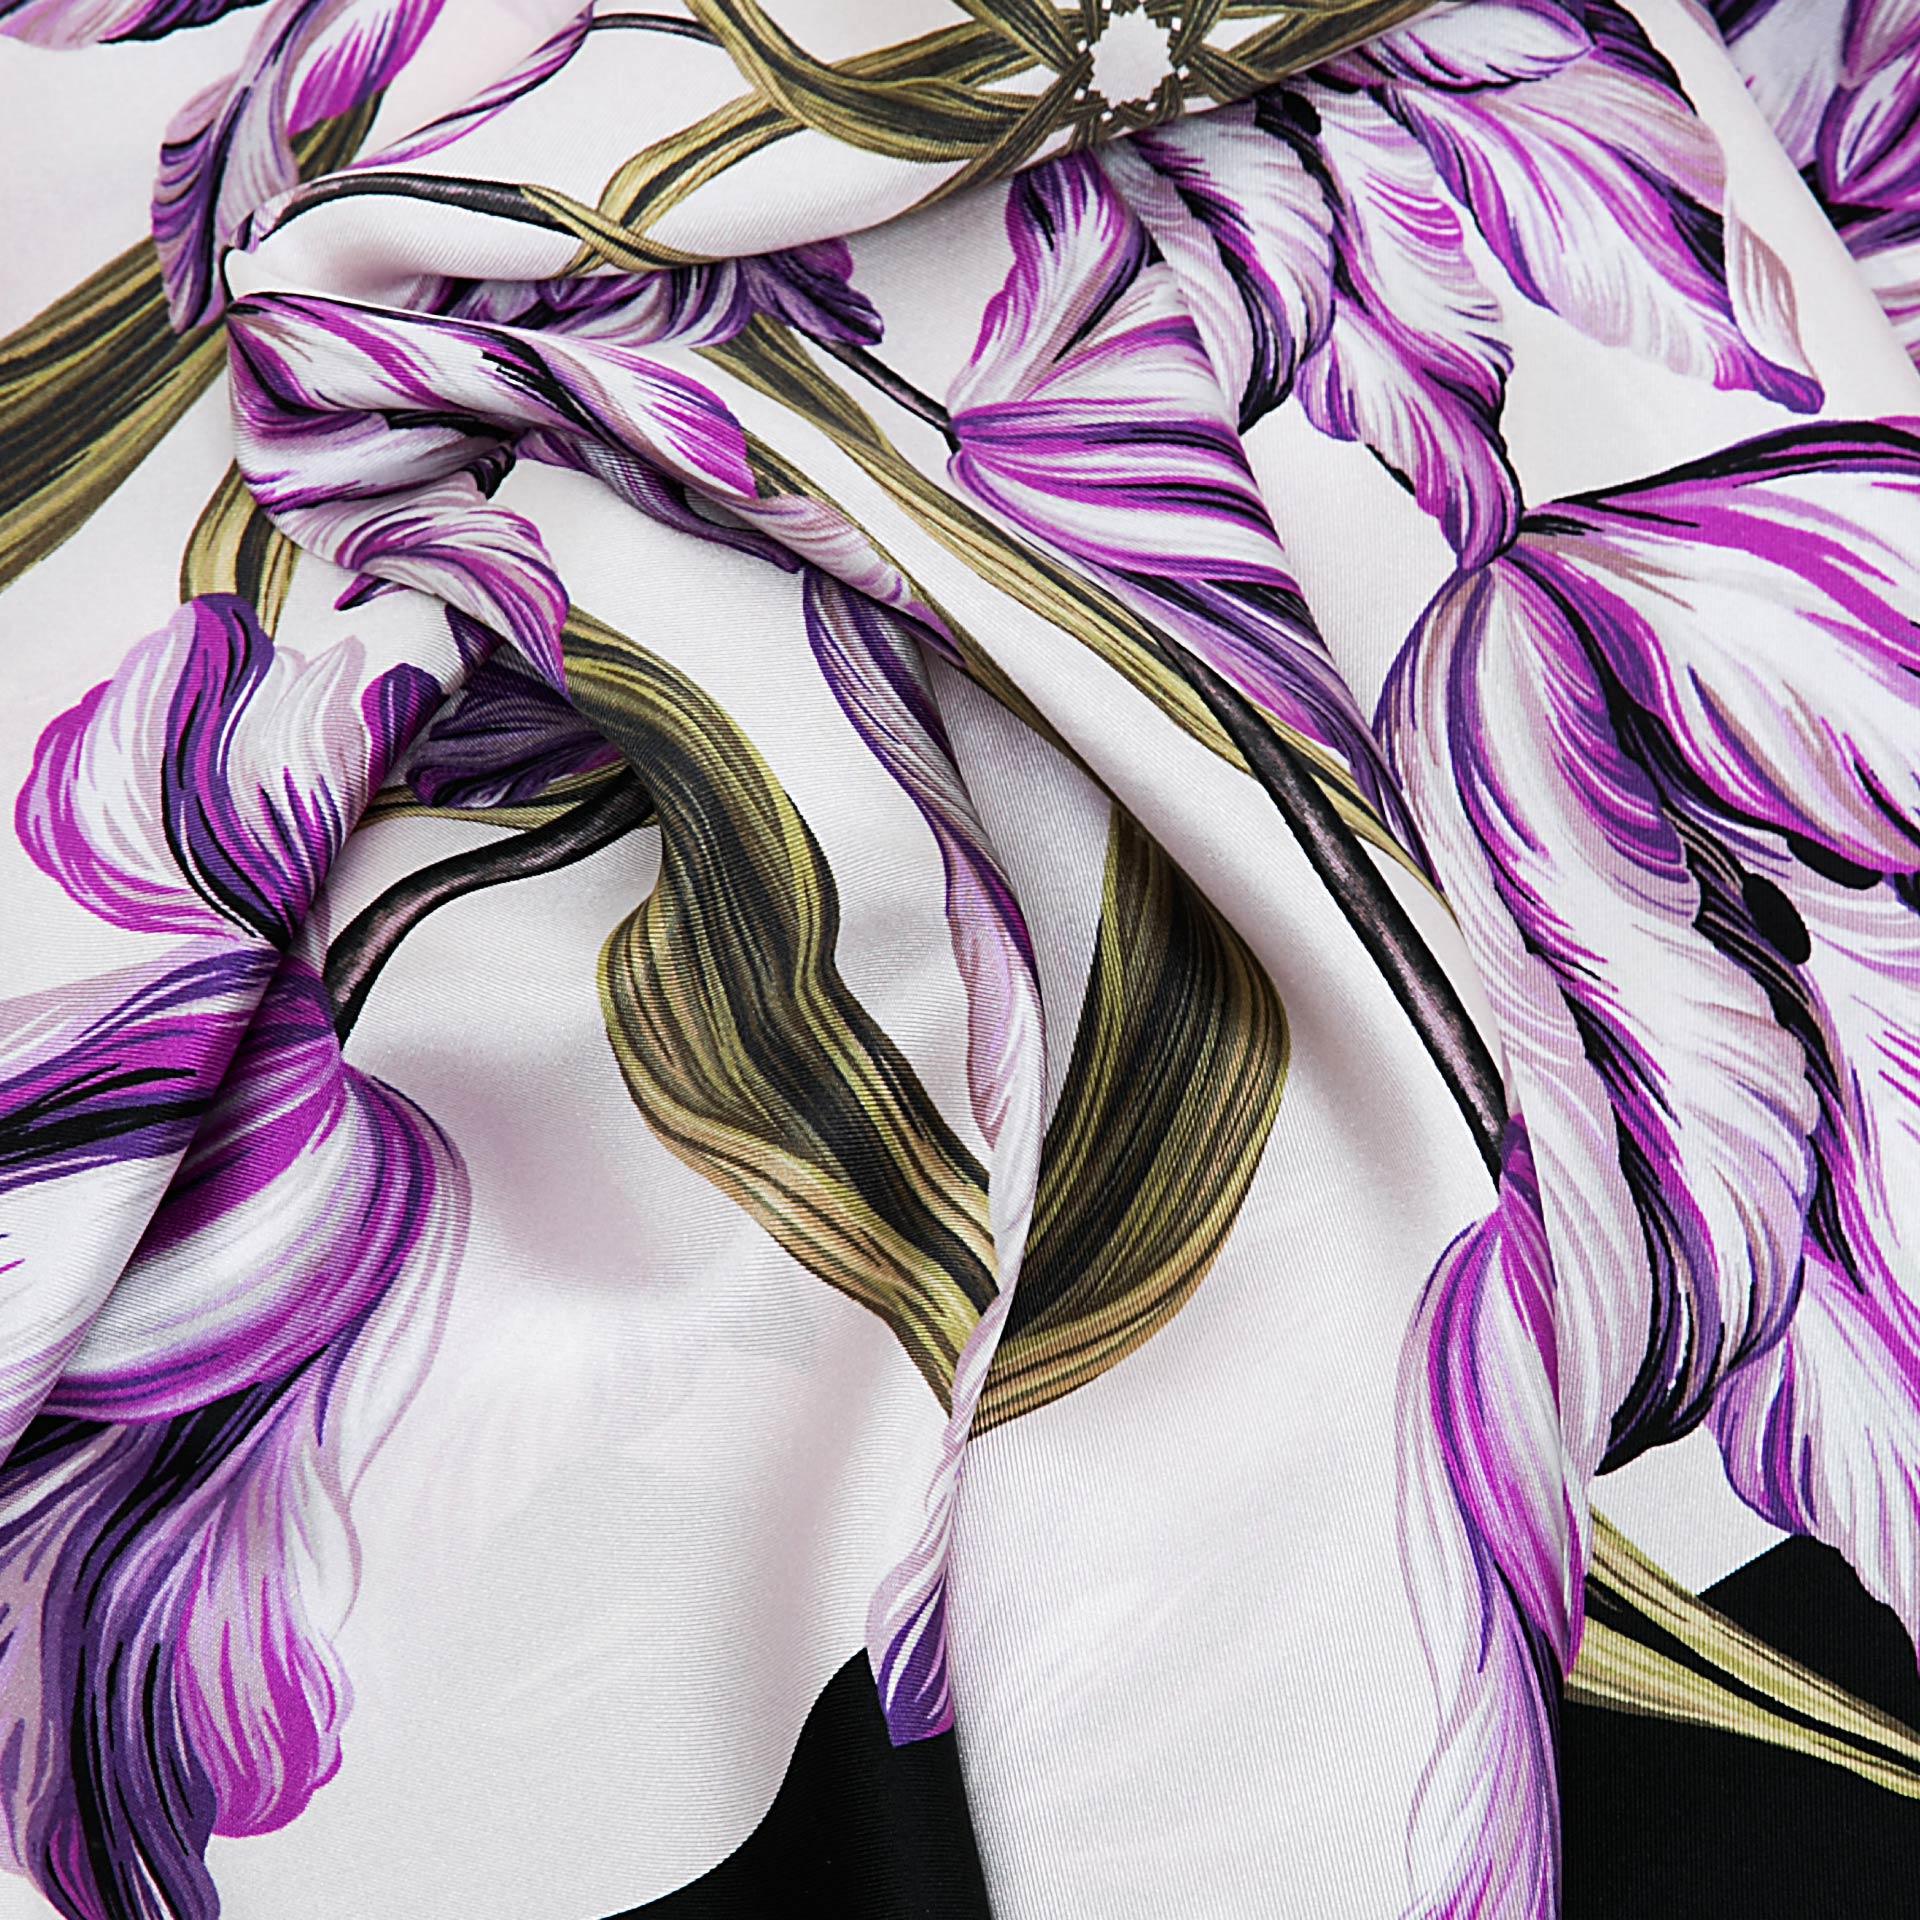 Violet British Tulip Garden Silk Scarf - Fusion of London's design and Italian craftsmanship, an exquisite gift choice.